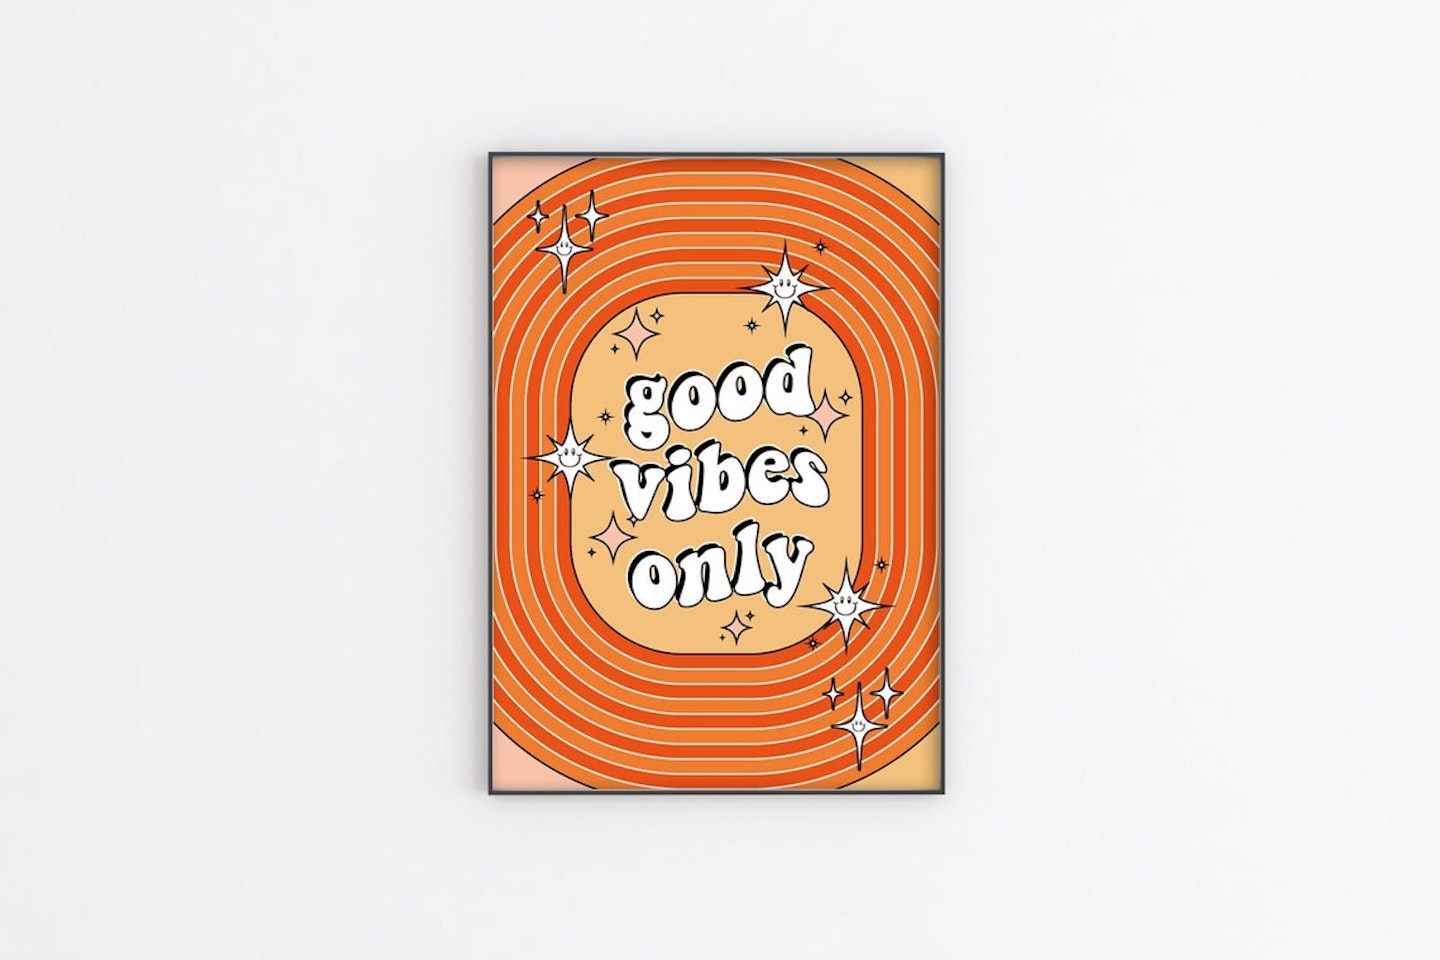 Etsy, Good Vibes Only Print, From £2.79